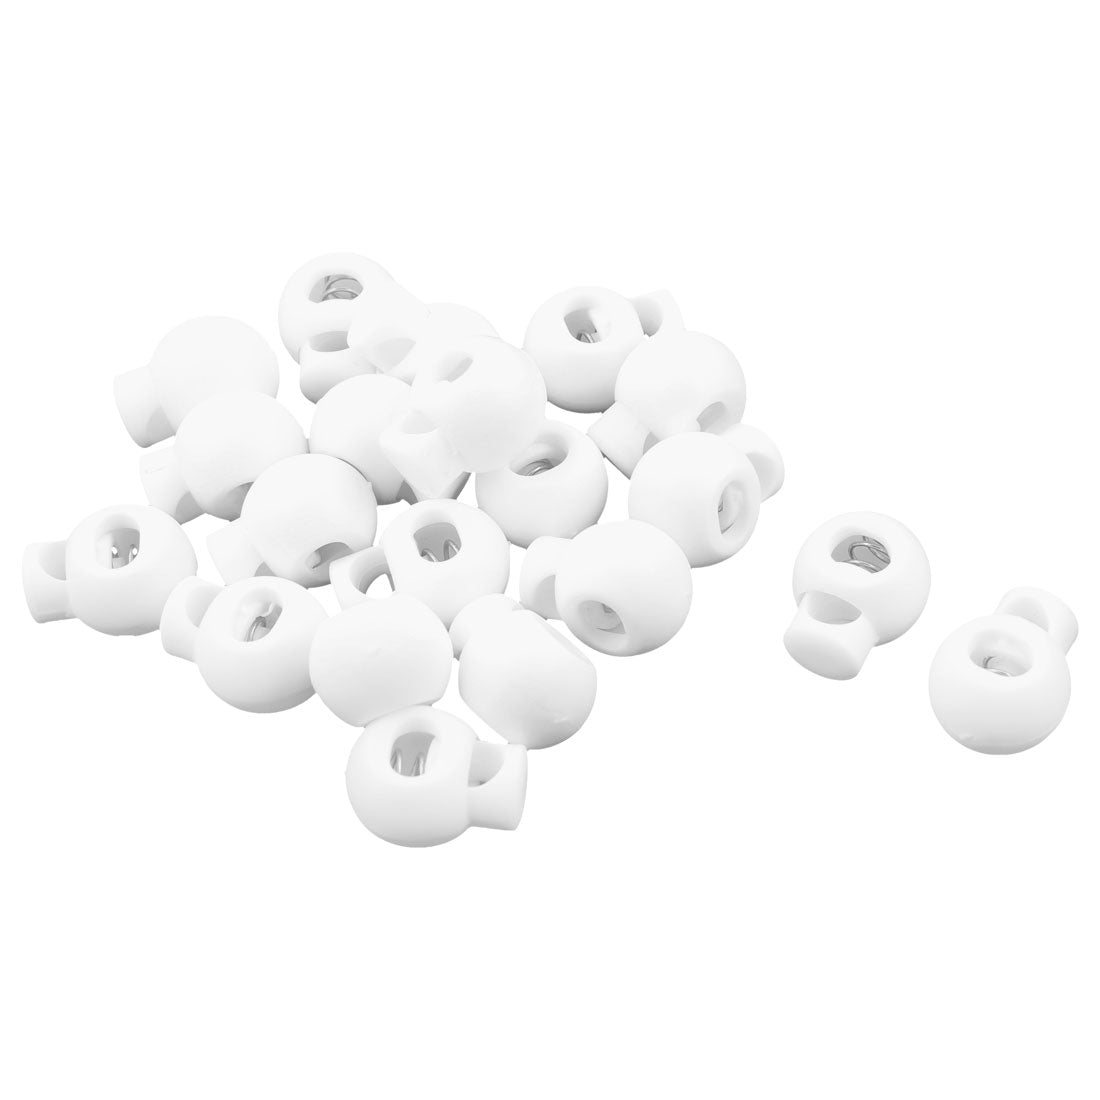 uxcell Uxcell Plastic Single Hole Design Toggle Stopper Cord Adjustive Lock White 20 PCS